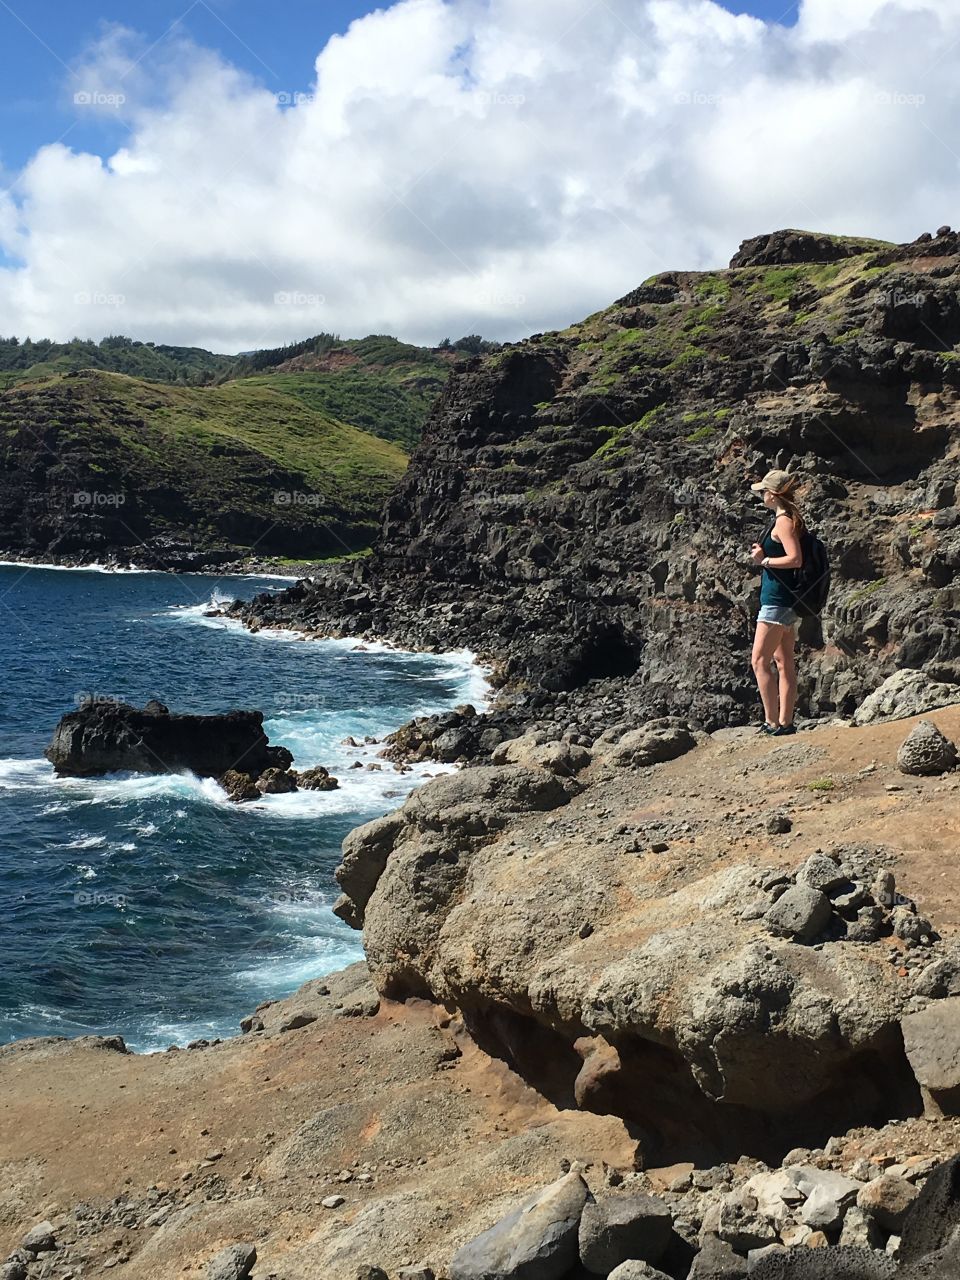 A hike over looking the beautiful ocean along the steep cliffs near the Blow Hole in Maui, Hawaii. 